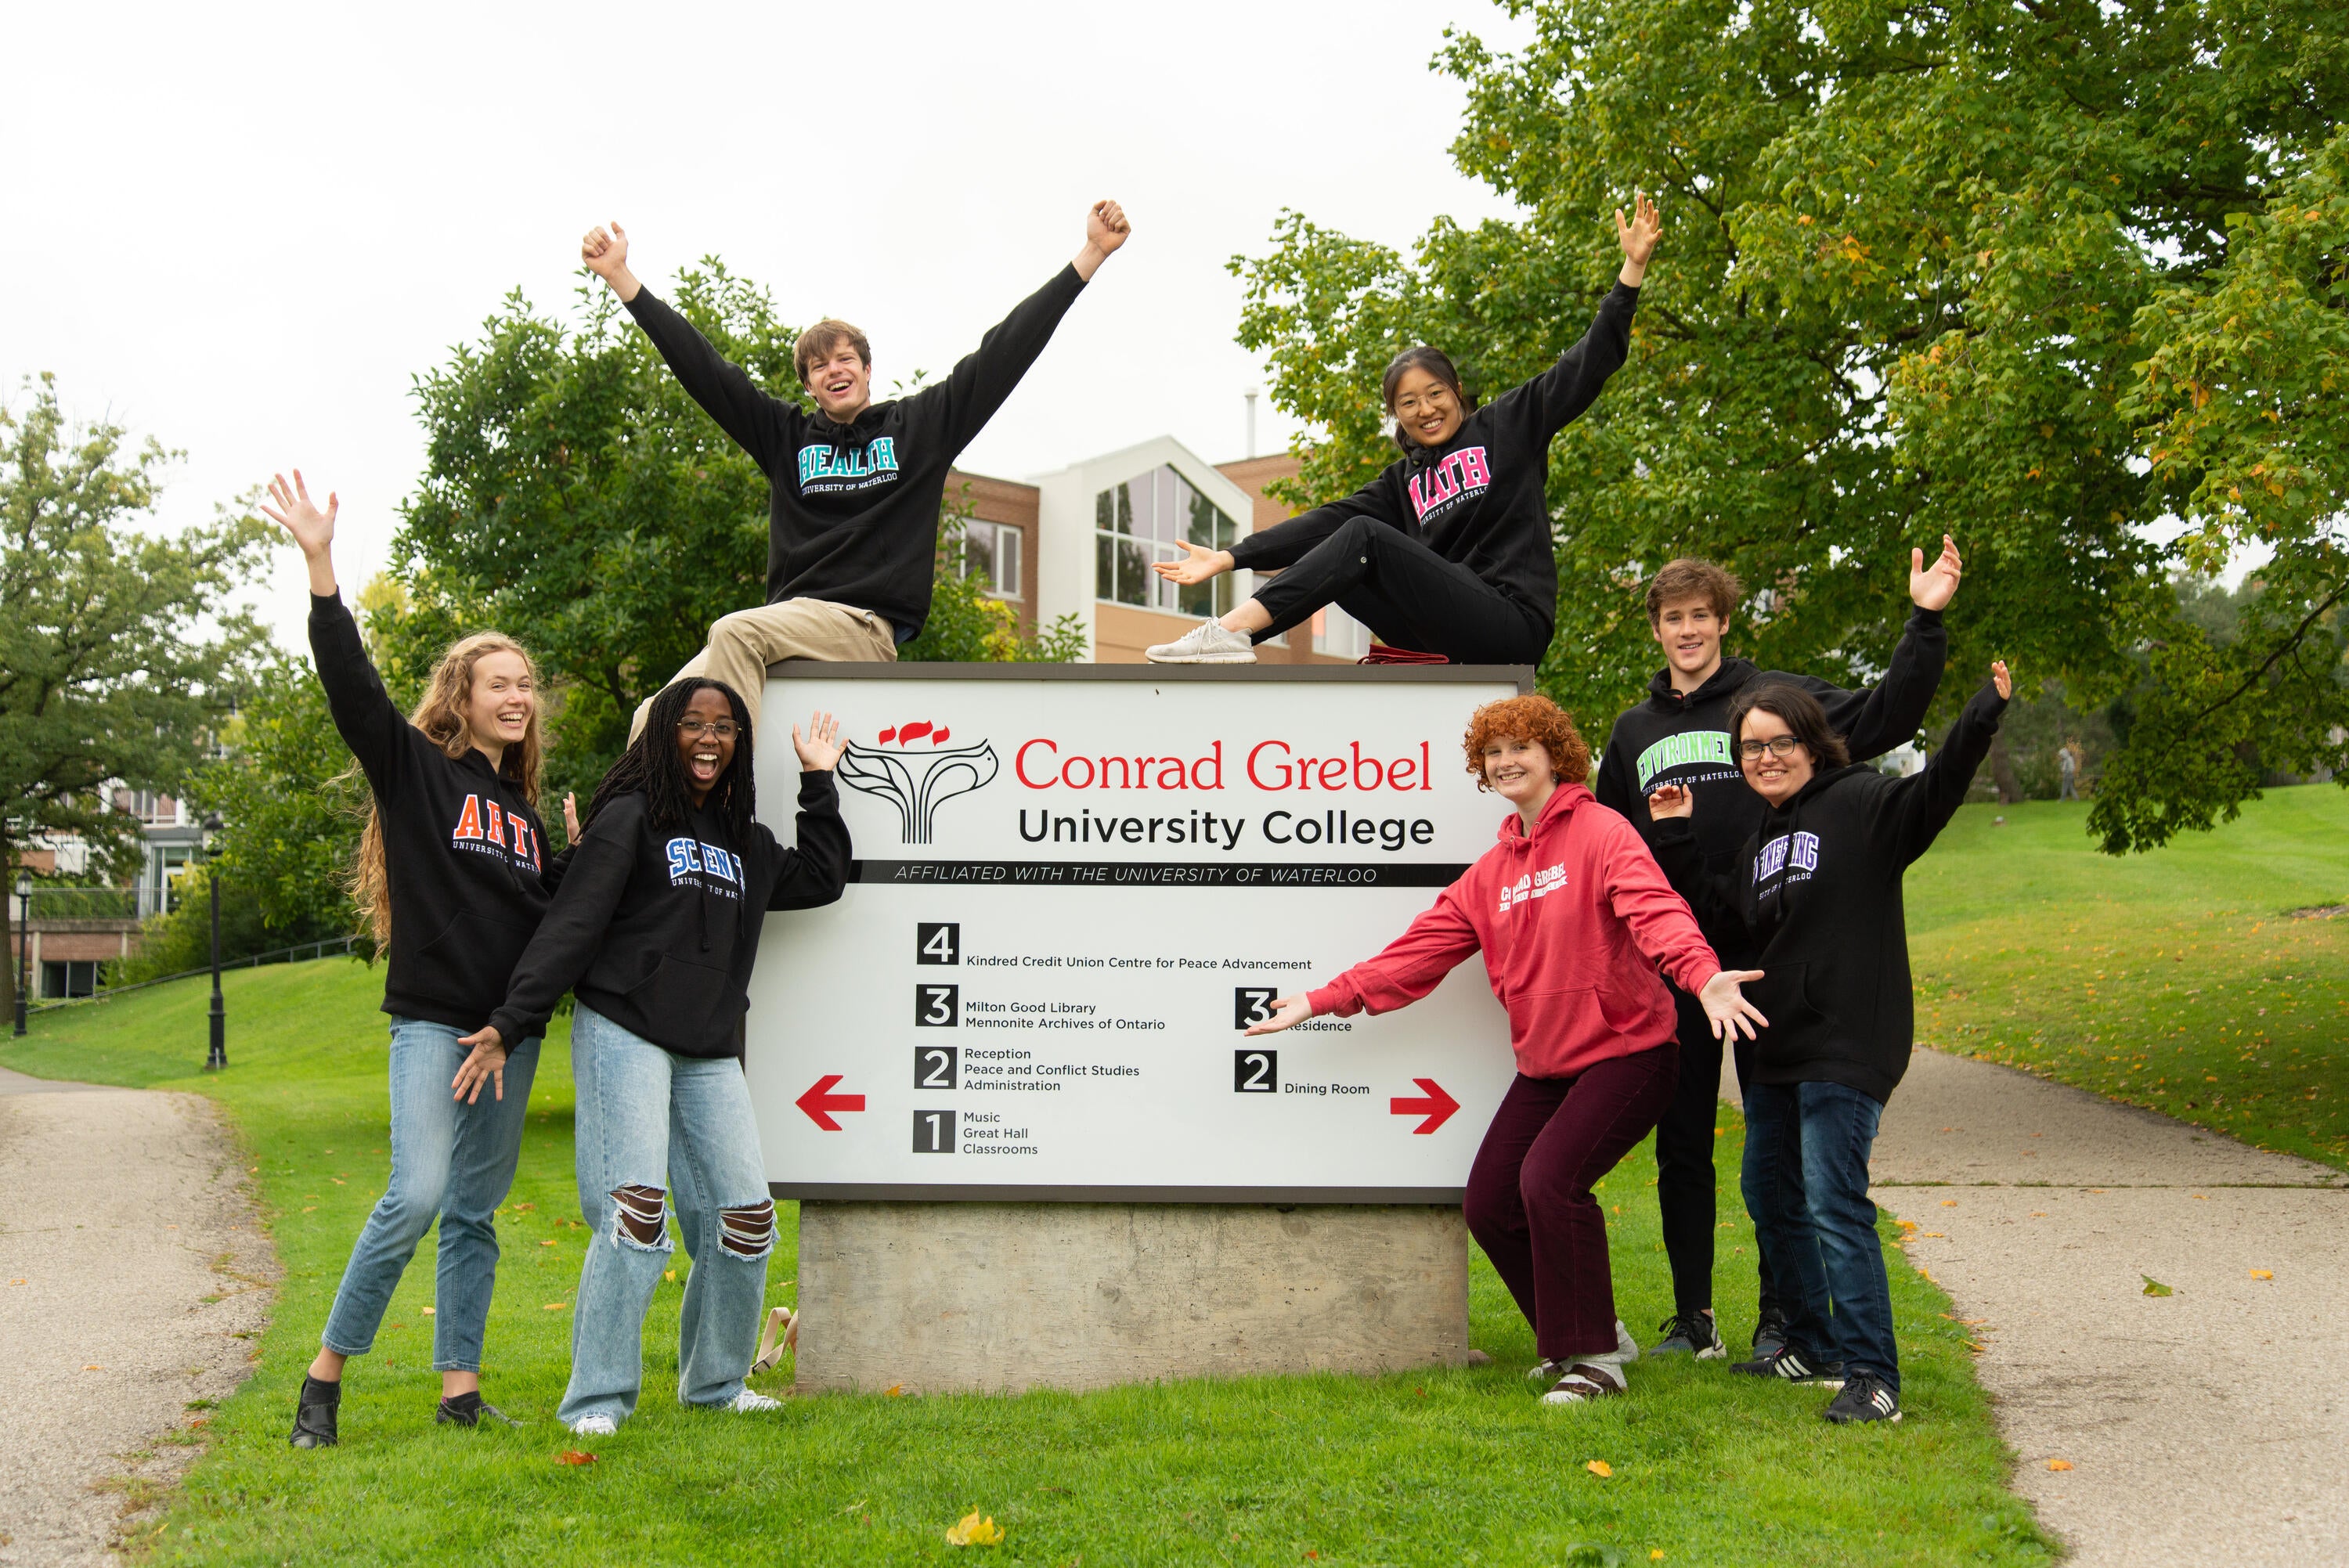 students cheer outside a grebel sign